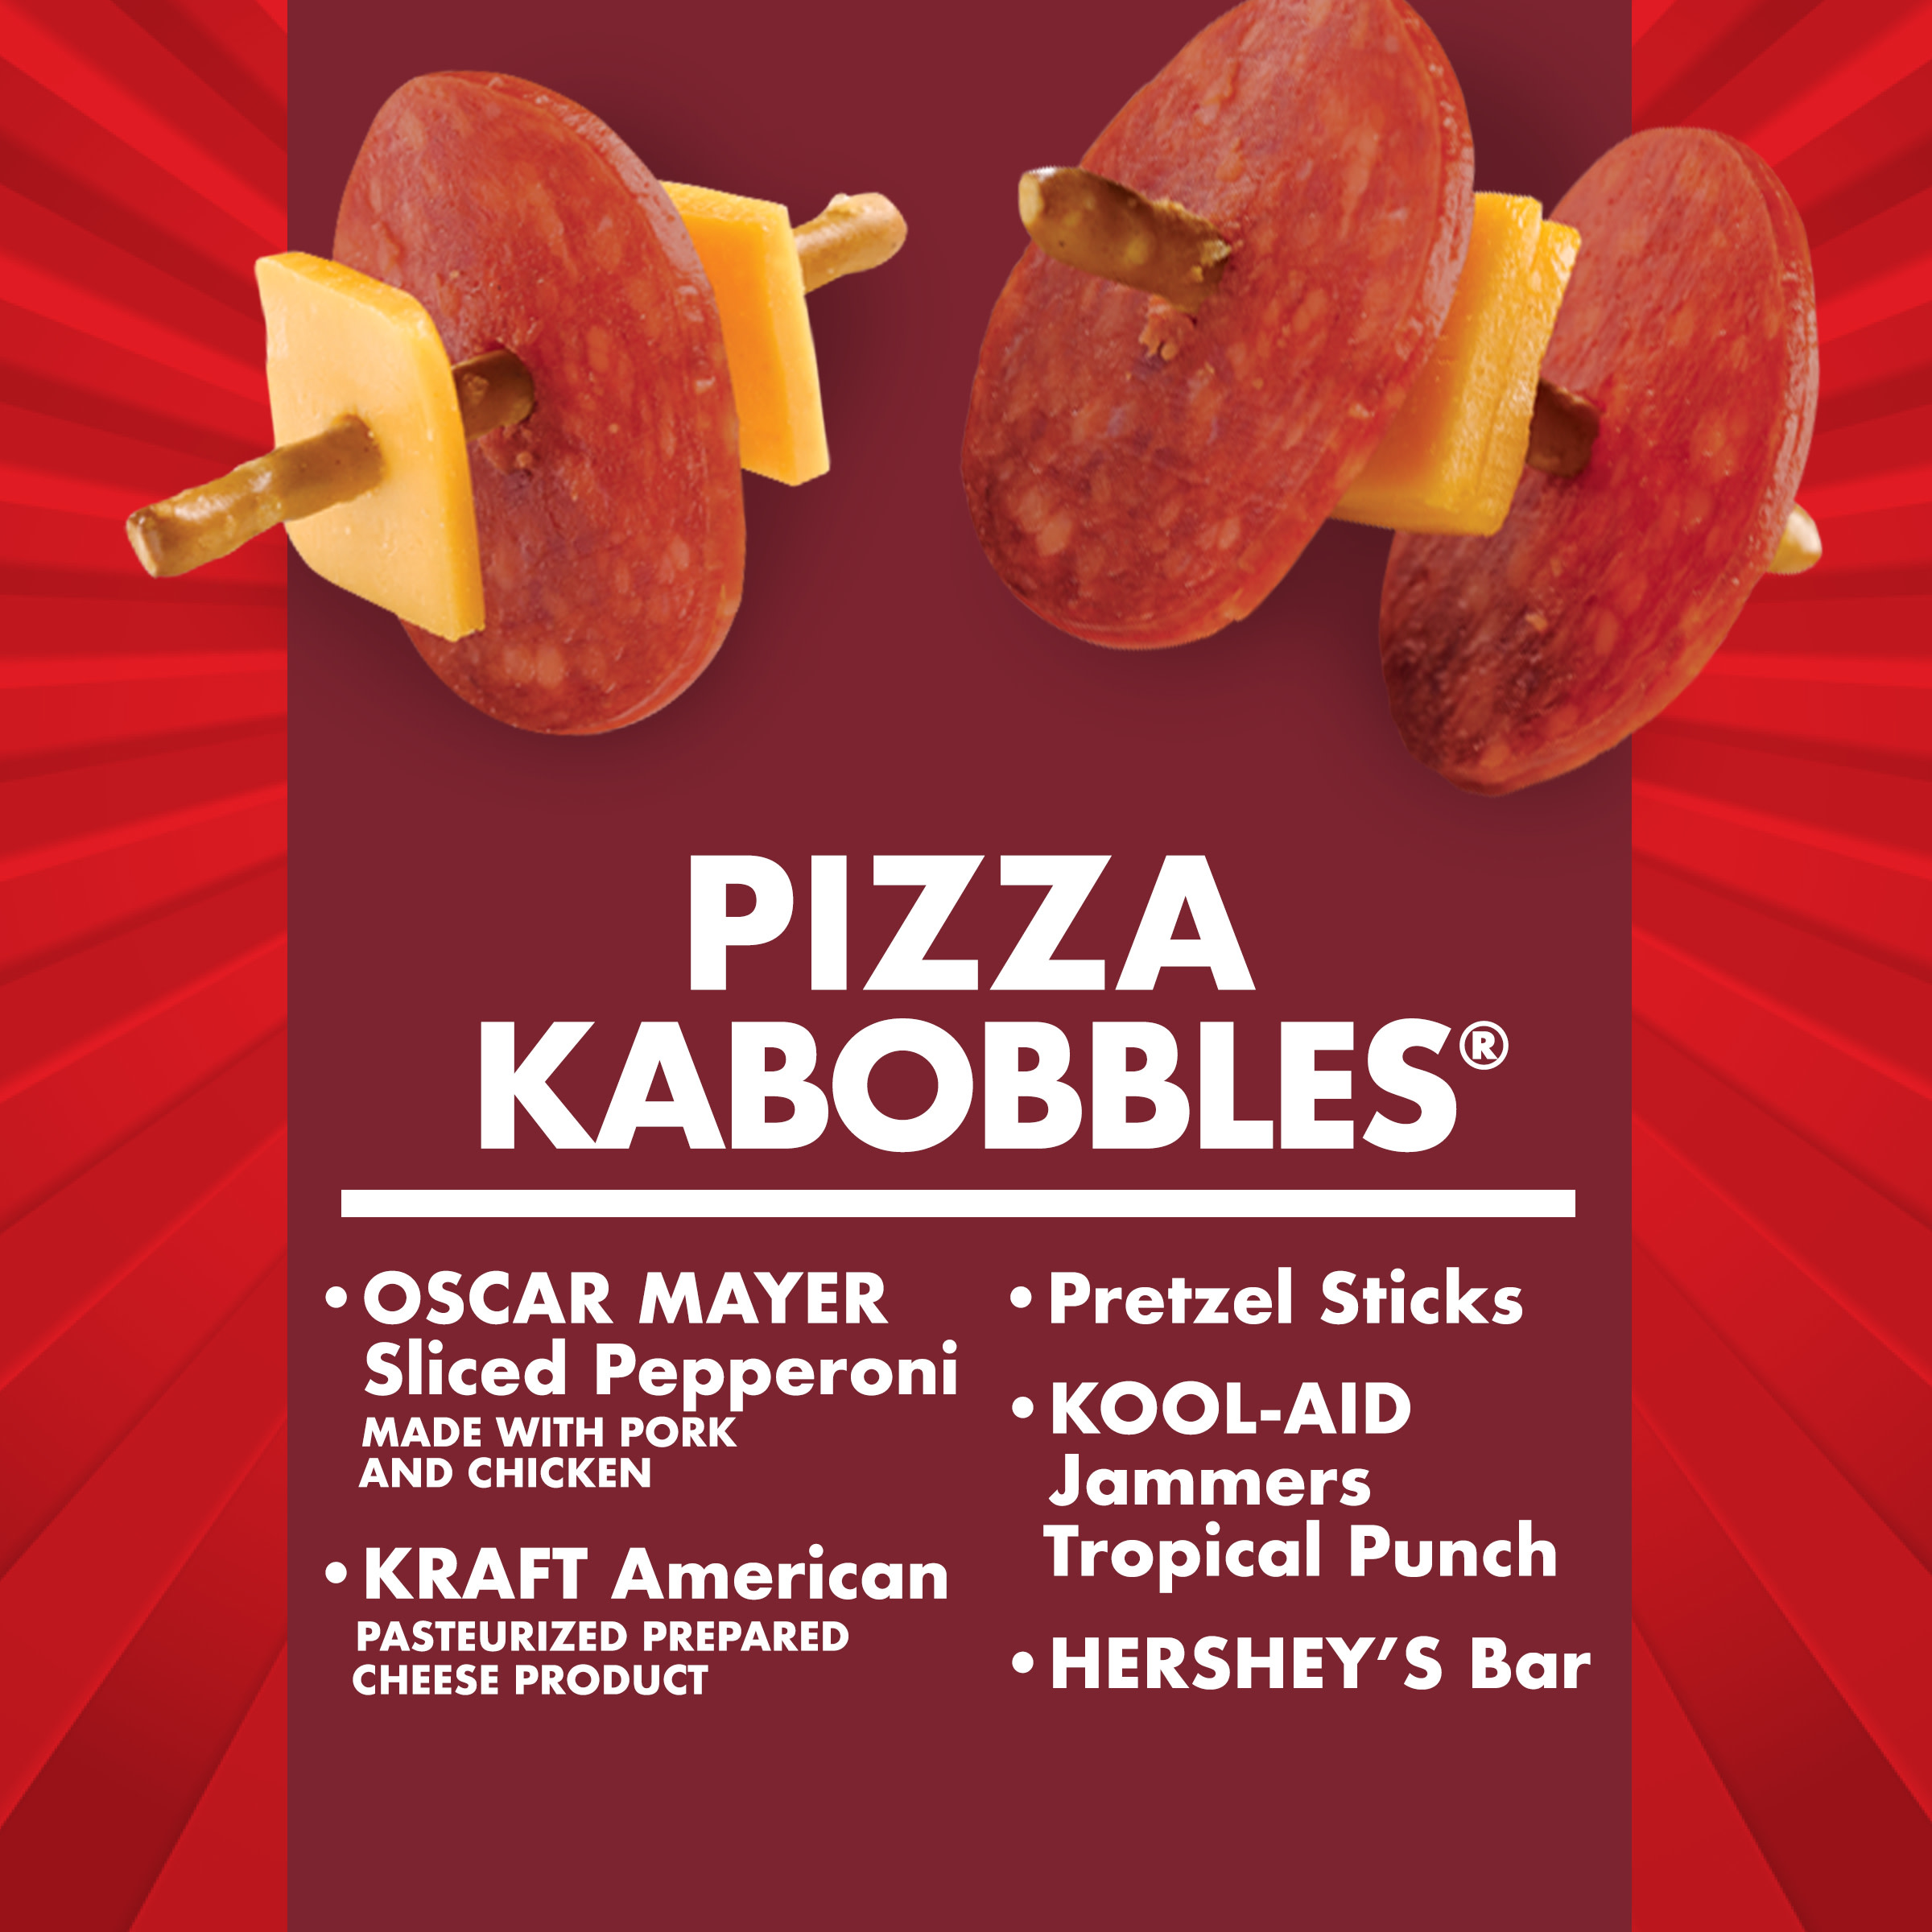 Lunchables Pepperoni Kabobbles Meal Kit with American Cheese, Pretzel Sticks, Kool-Aid Jammers Tropical Punch Drink & Hershey's Bar, 8 oz Box - image 2 of 14